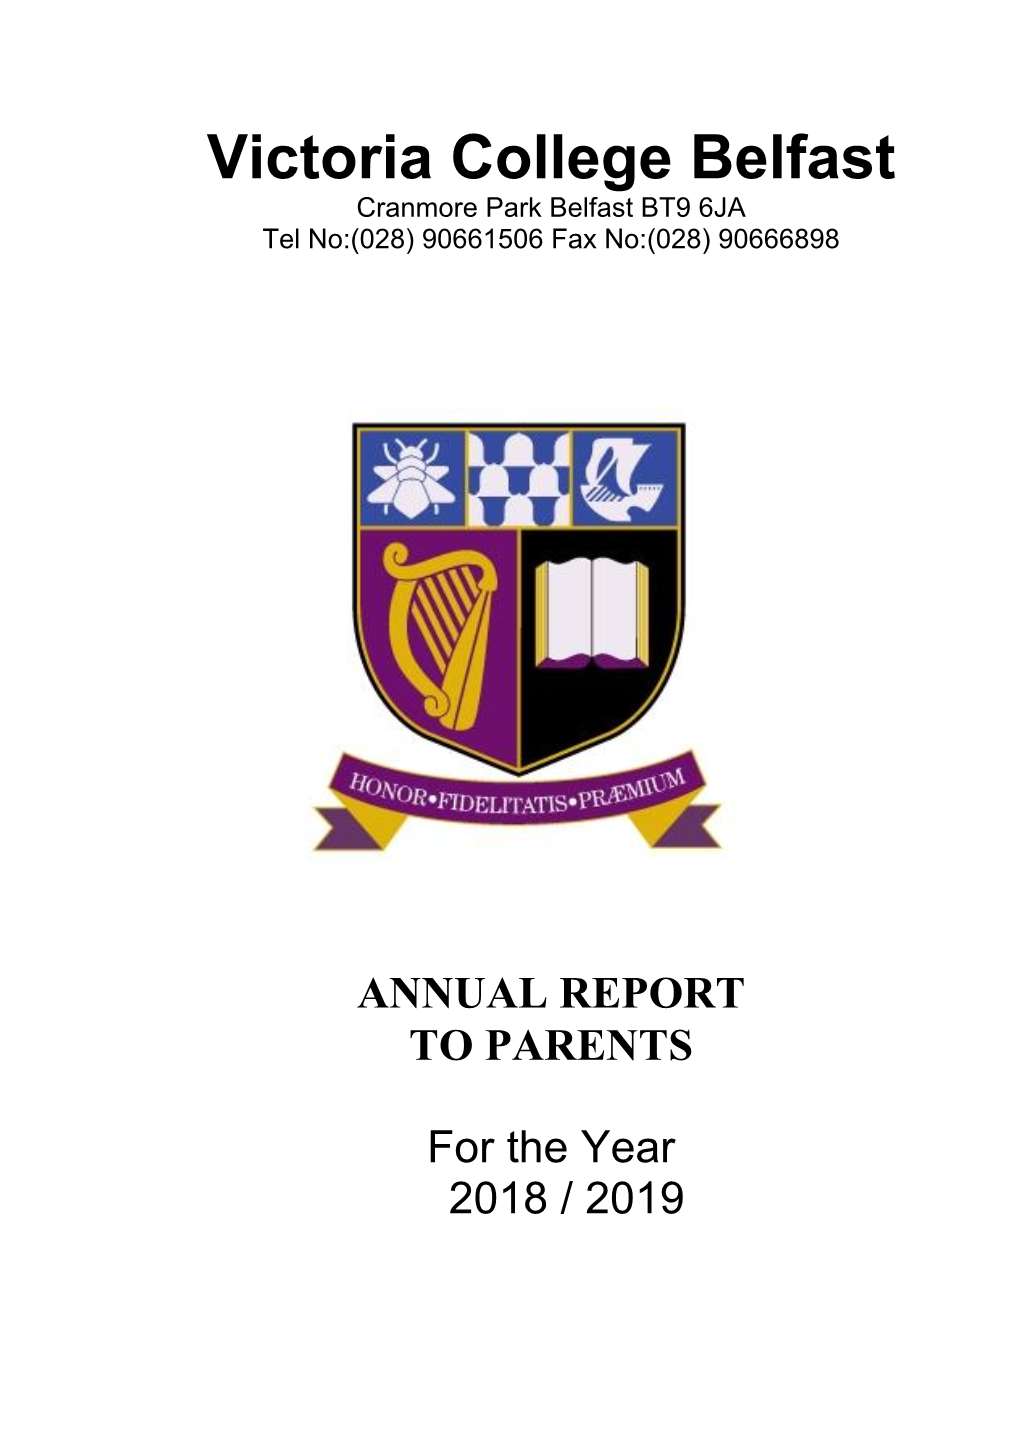 ANNUAL REPORT to PARENTS for the Year 2018 / 2019